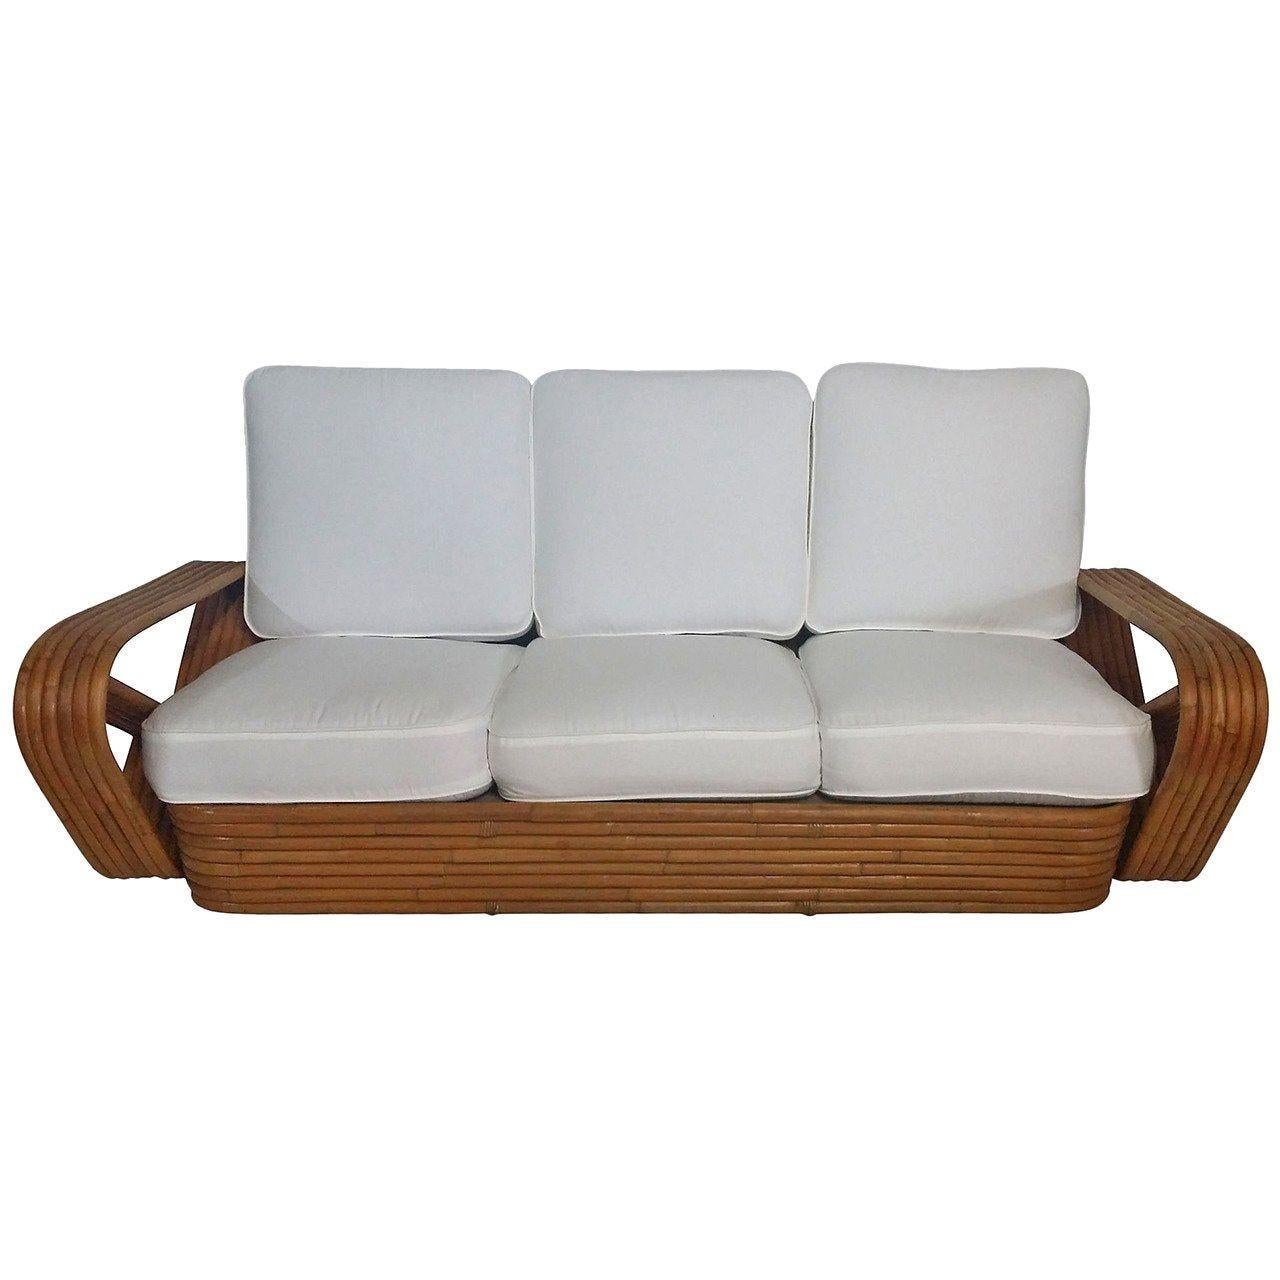 Original rattan six-strand square pretzel arm three-seat sofa with a wonderfully stacked rattan base and white covered cushions,

1930, United Staes
 
We we only purchase and sell only the best and finest rattan furniture made by the best and most